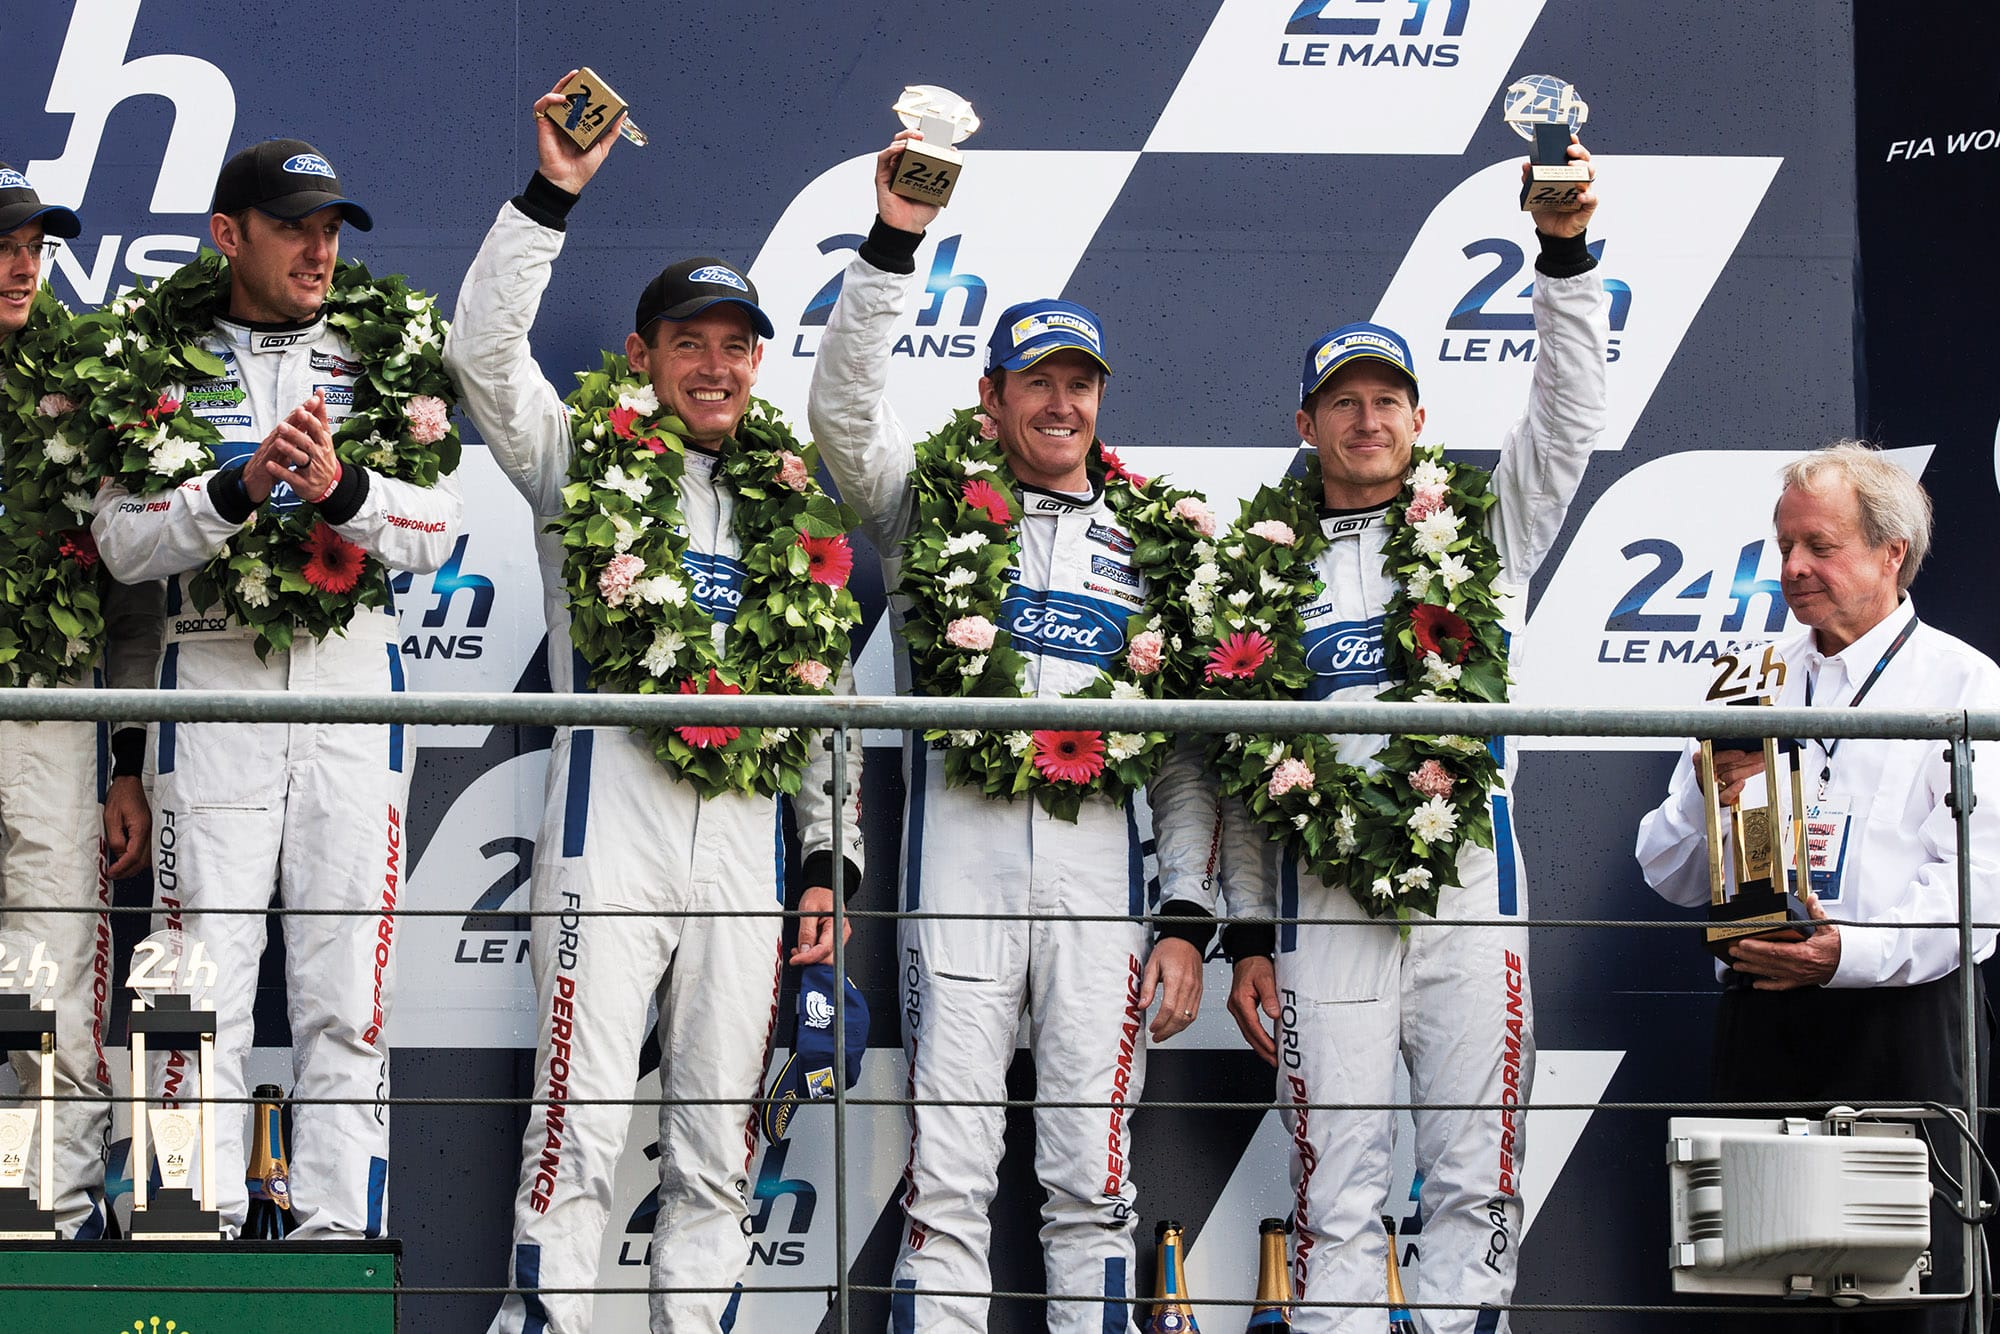 Ford GT Le mans win podium